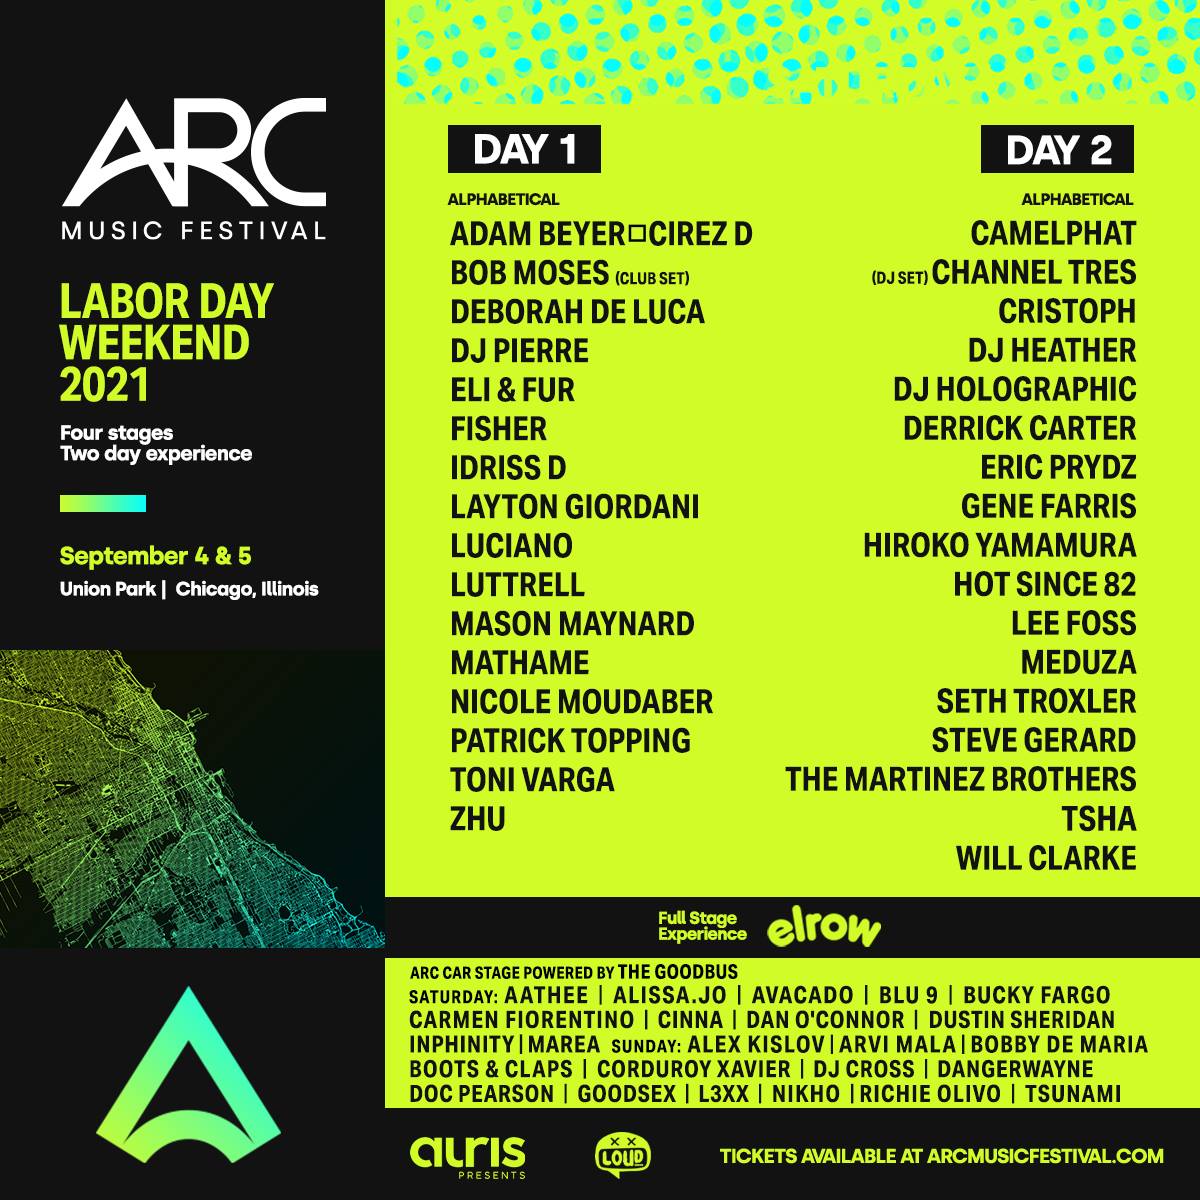 Arc Music Festival Releases Single Day Lineups